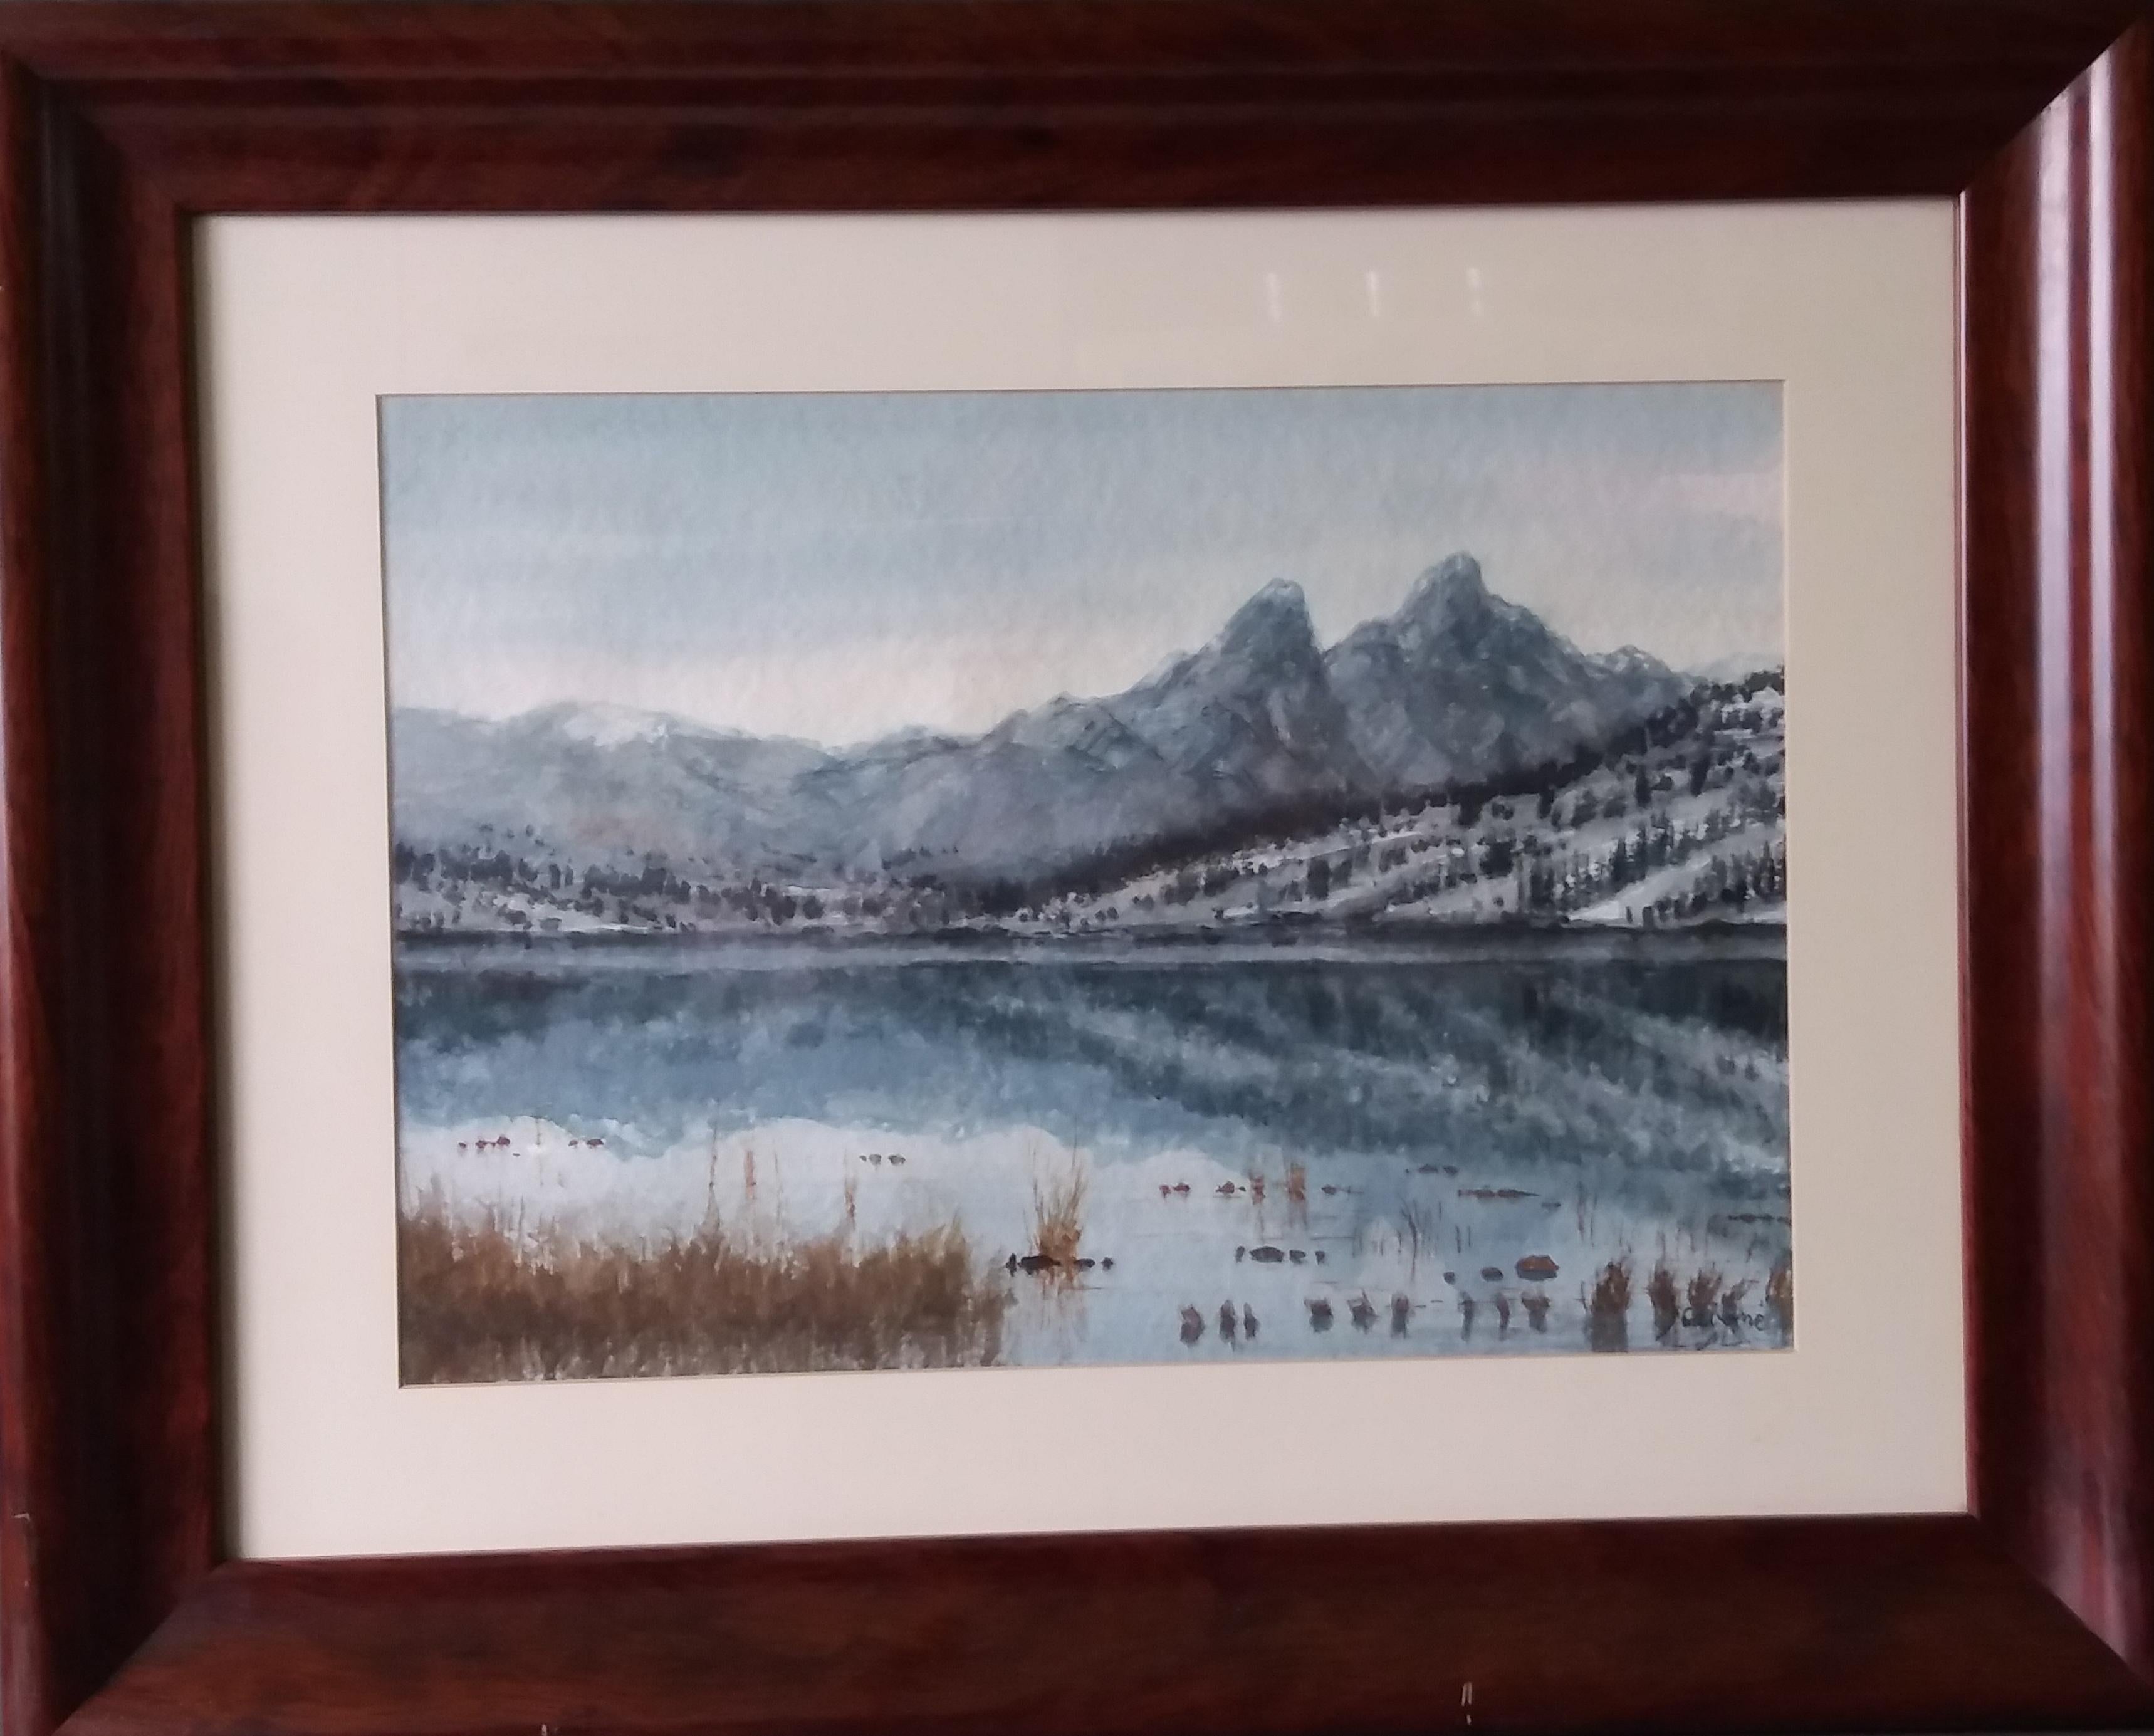  Cabane   Lake in the Pyrenees Landscape . figurative. lake.mountains. blue - Realist Painting by Joaquin Cabane